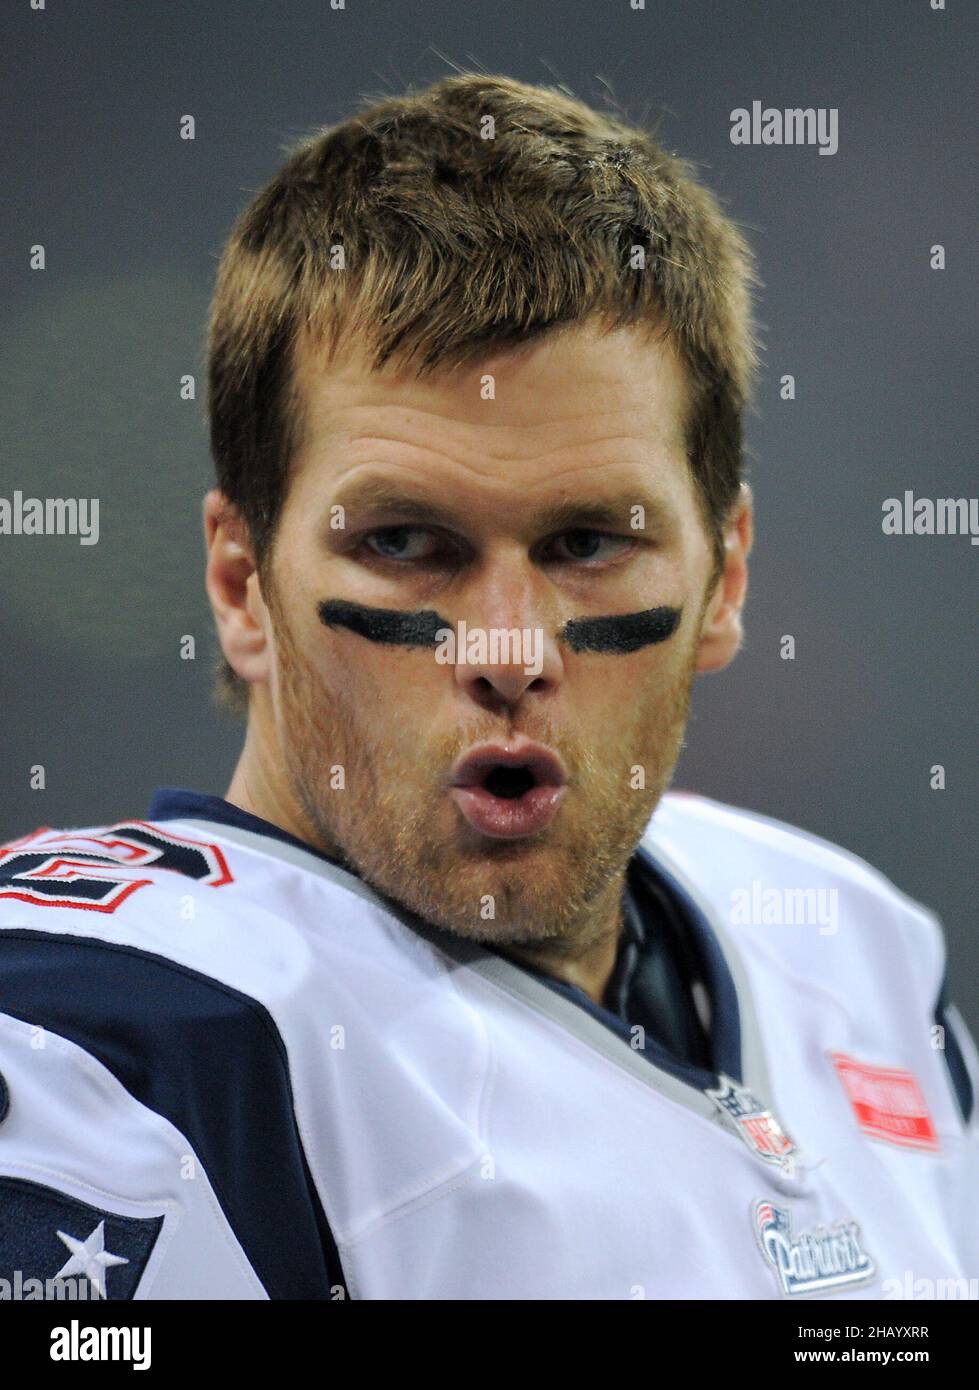 File photo dated 28-10-2012 of Tom Brady, who celebrated his seventh Super Bowl victory after guiding the Tampa Bay Buccaneers to a 31-9 win over the Kansas City Chiefs. Issue date: Thursday December 16, 2021. Stock Photo